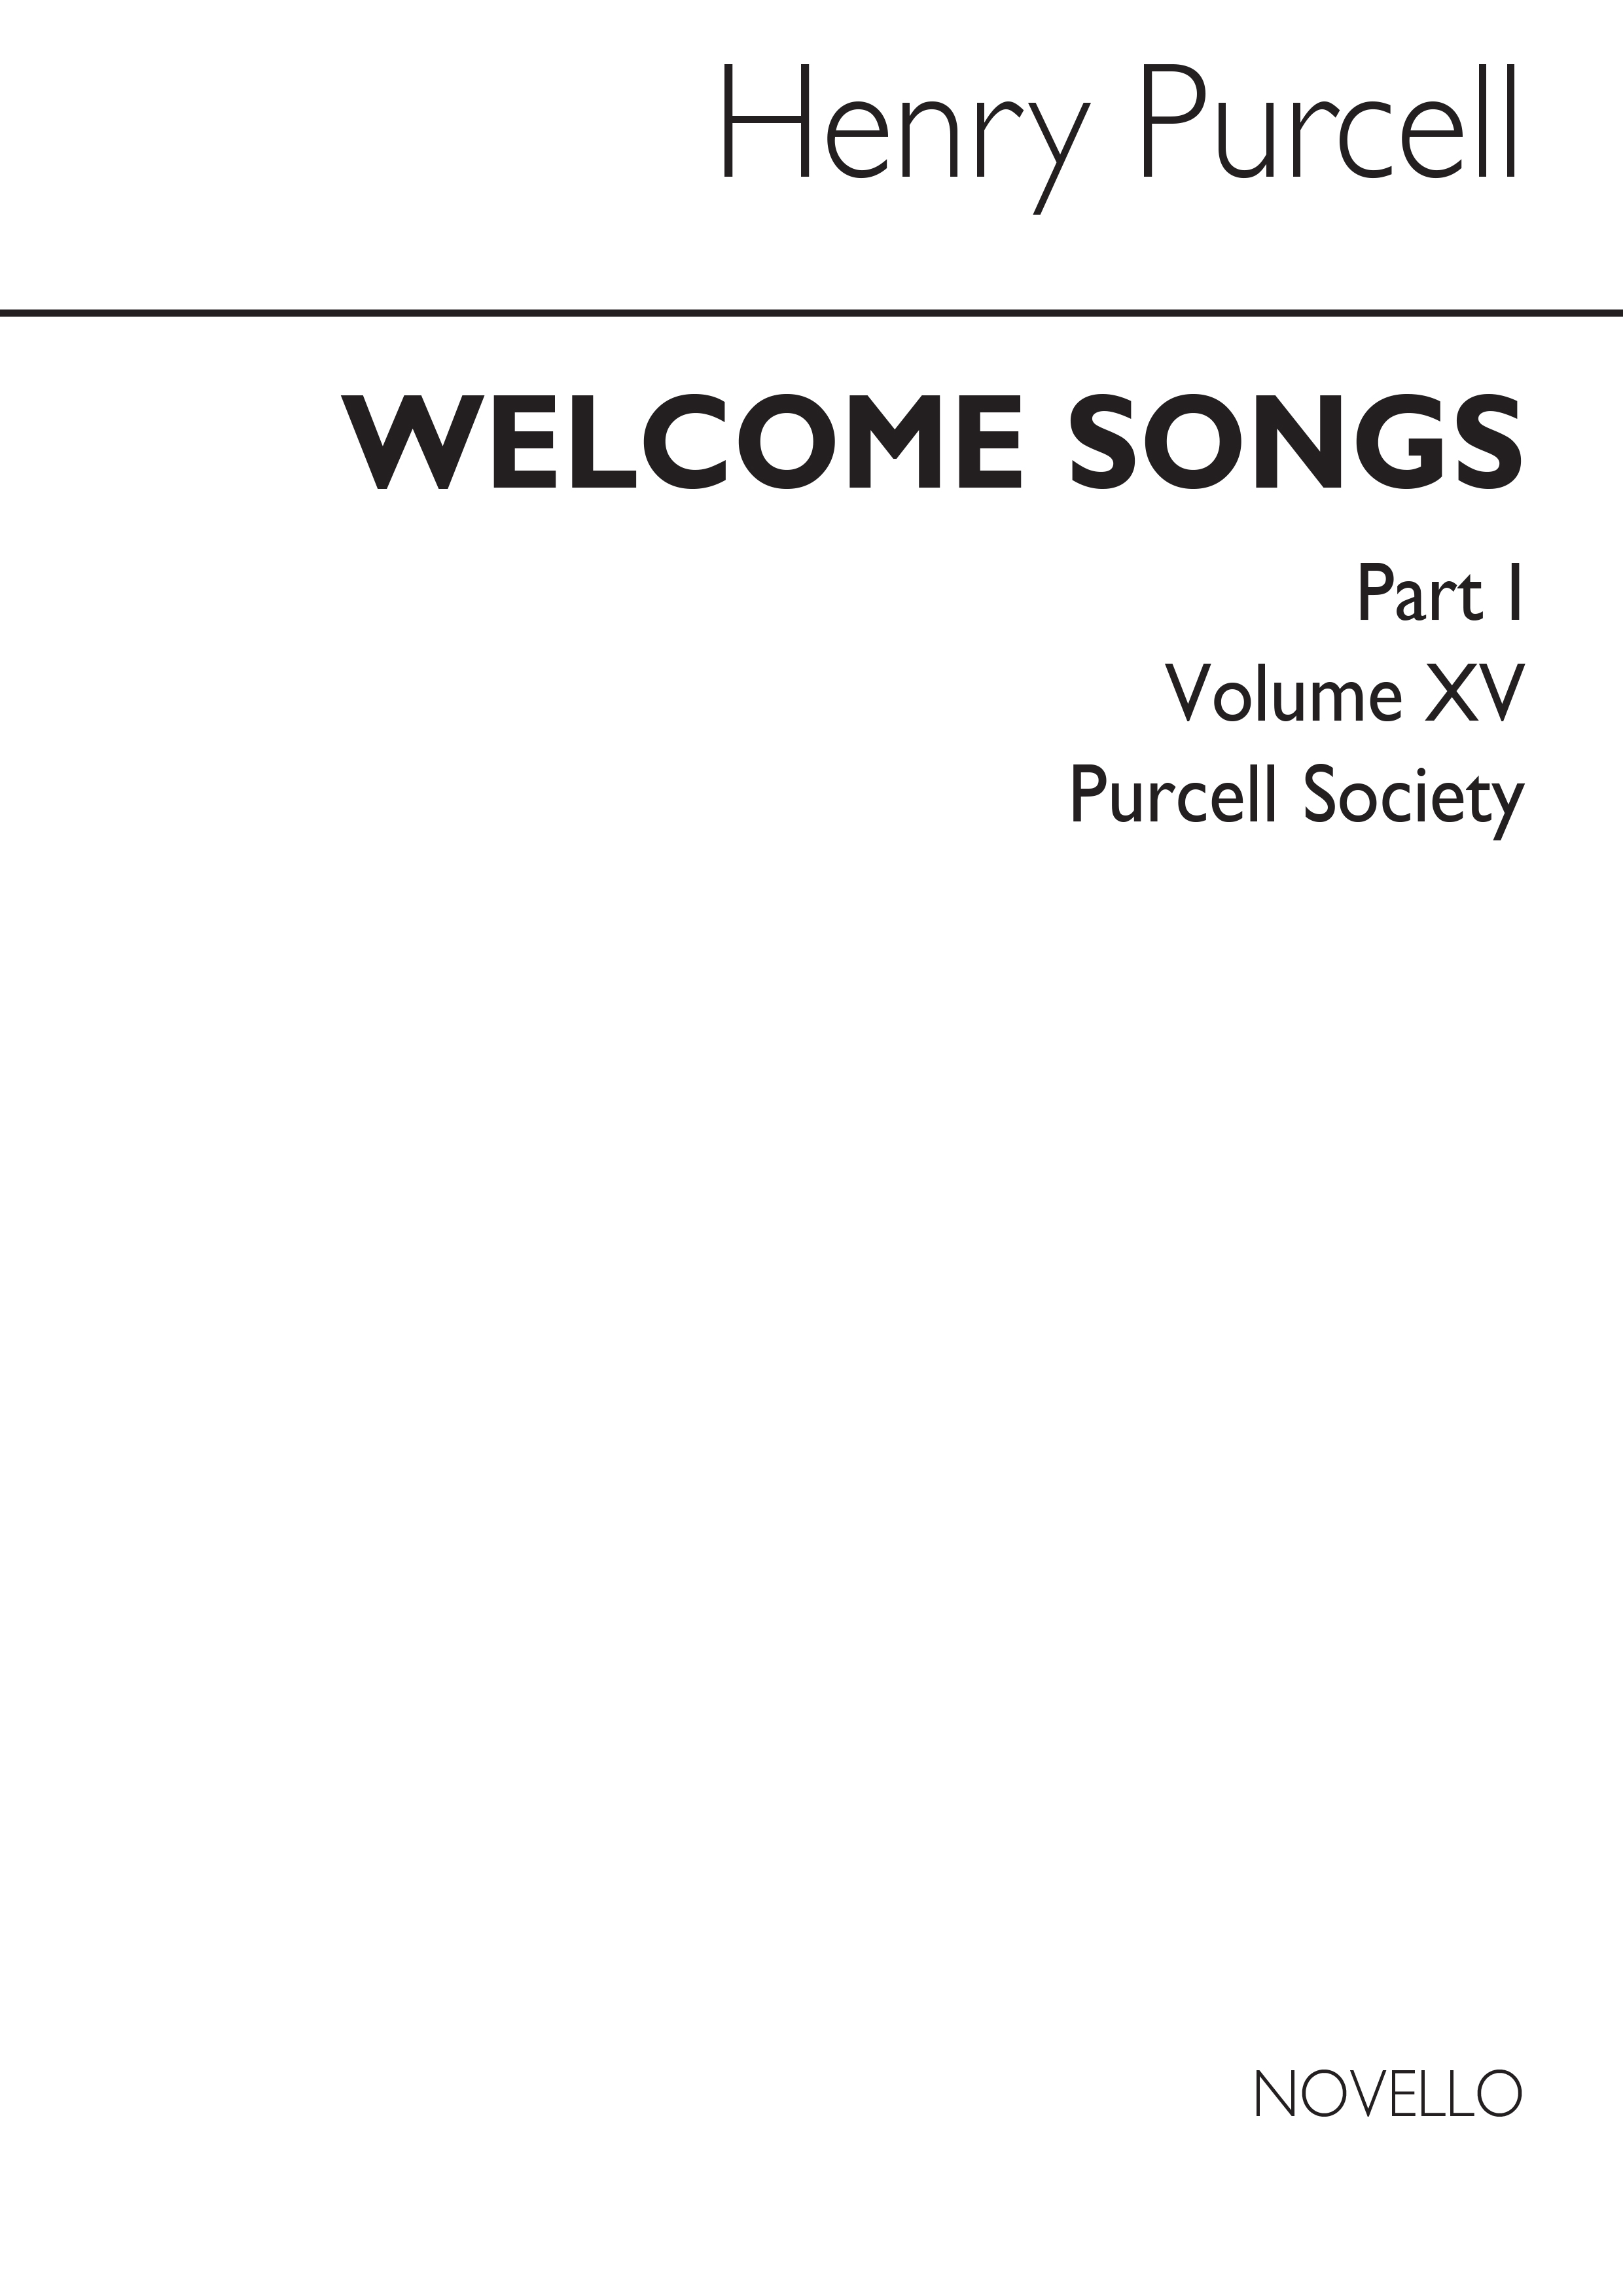 Henry Purcell: Purcell Society Volume 15 - Royal Welcome Songs: SATB: Vocal